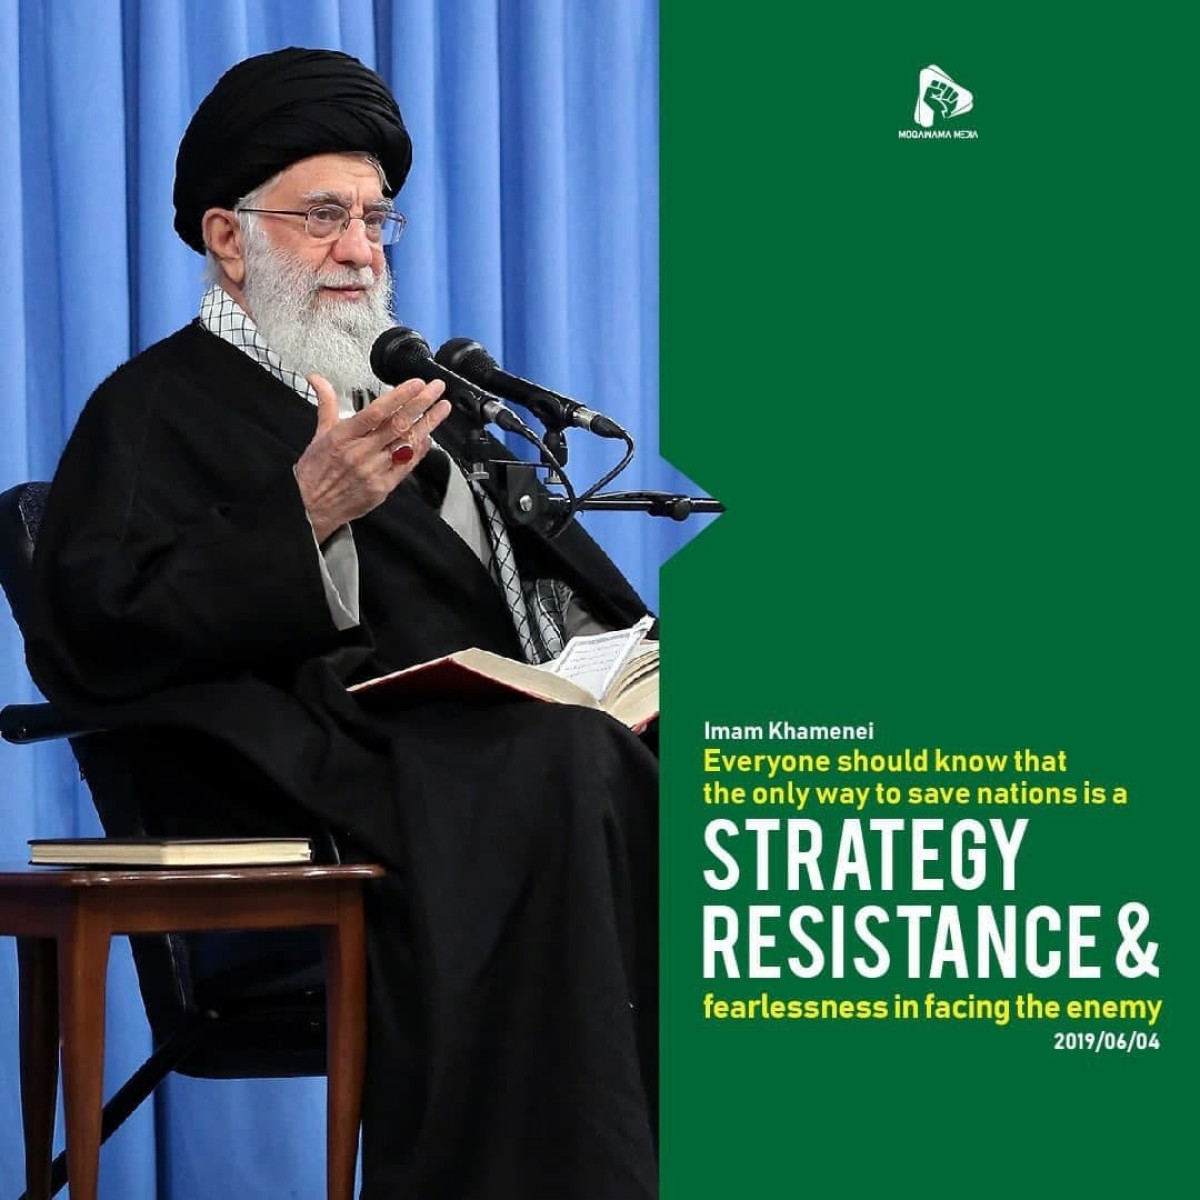 Everyone should know that the only way to save nations is a strategy resistance & fearlessness in facing the enemy